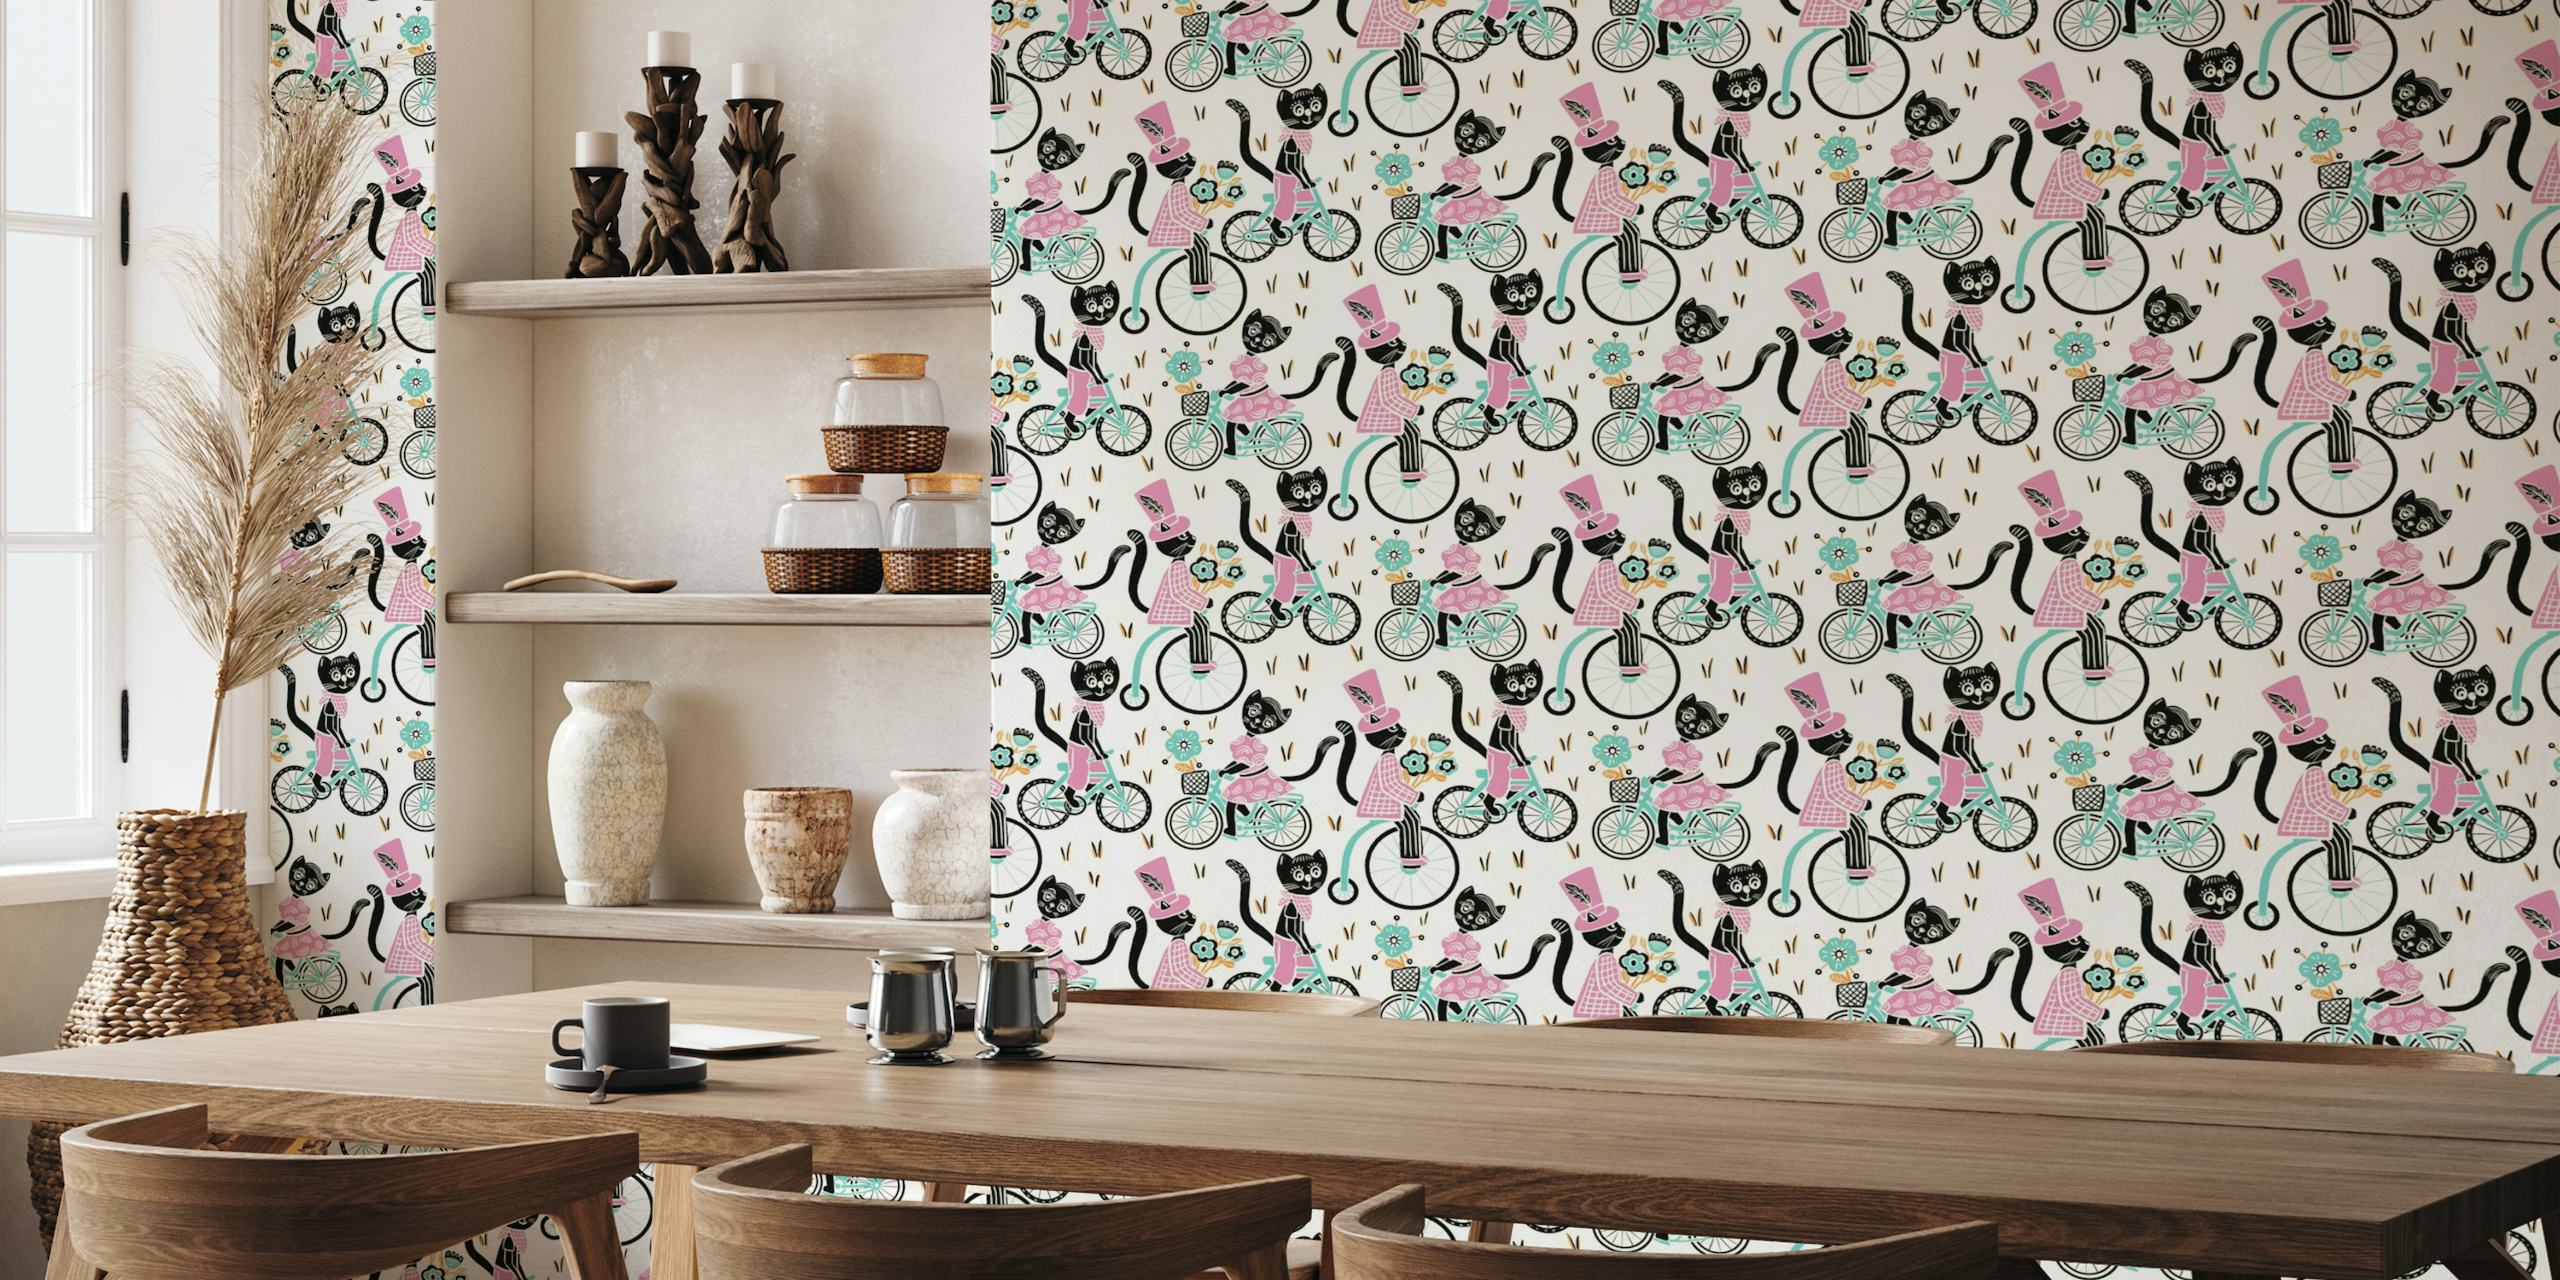 Cats on Bikes: Fun Mint Green and Pastel Pink wallpaper